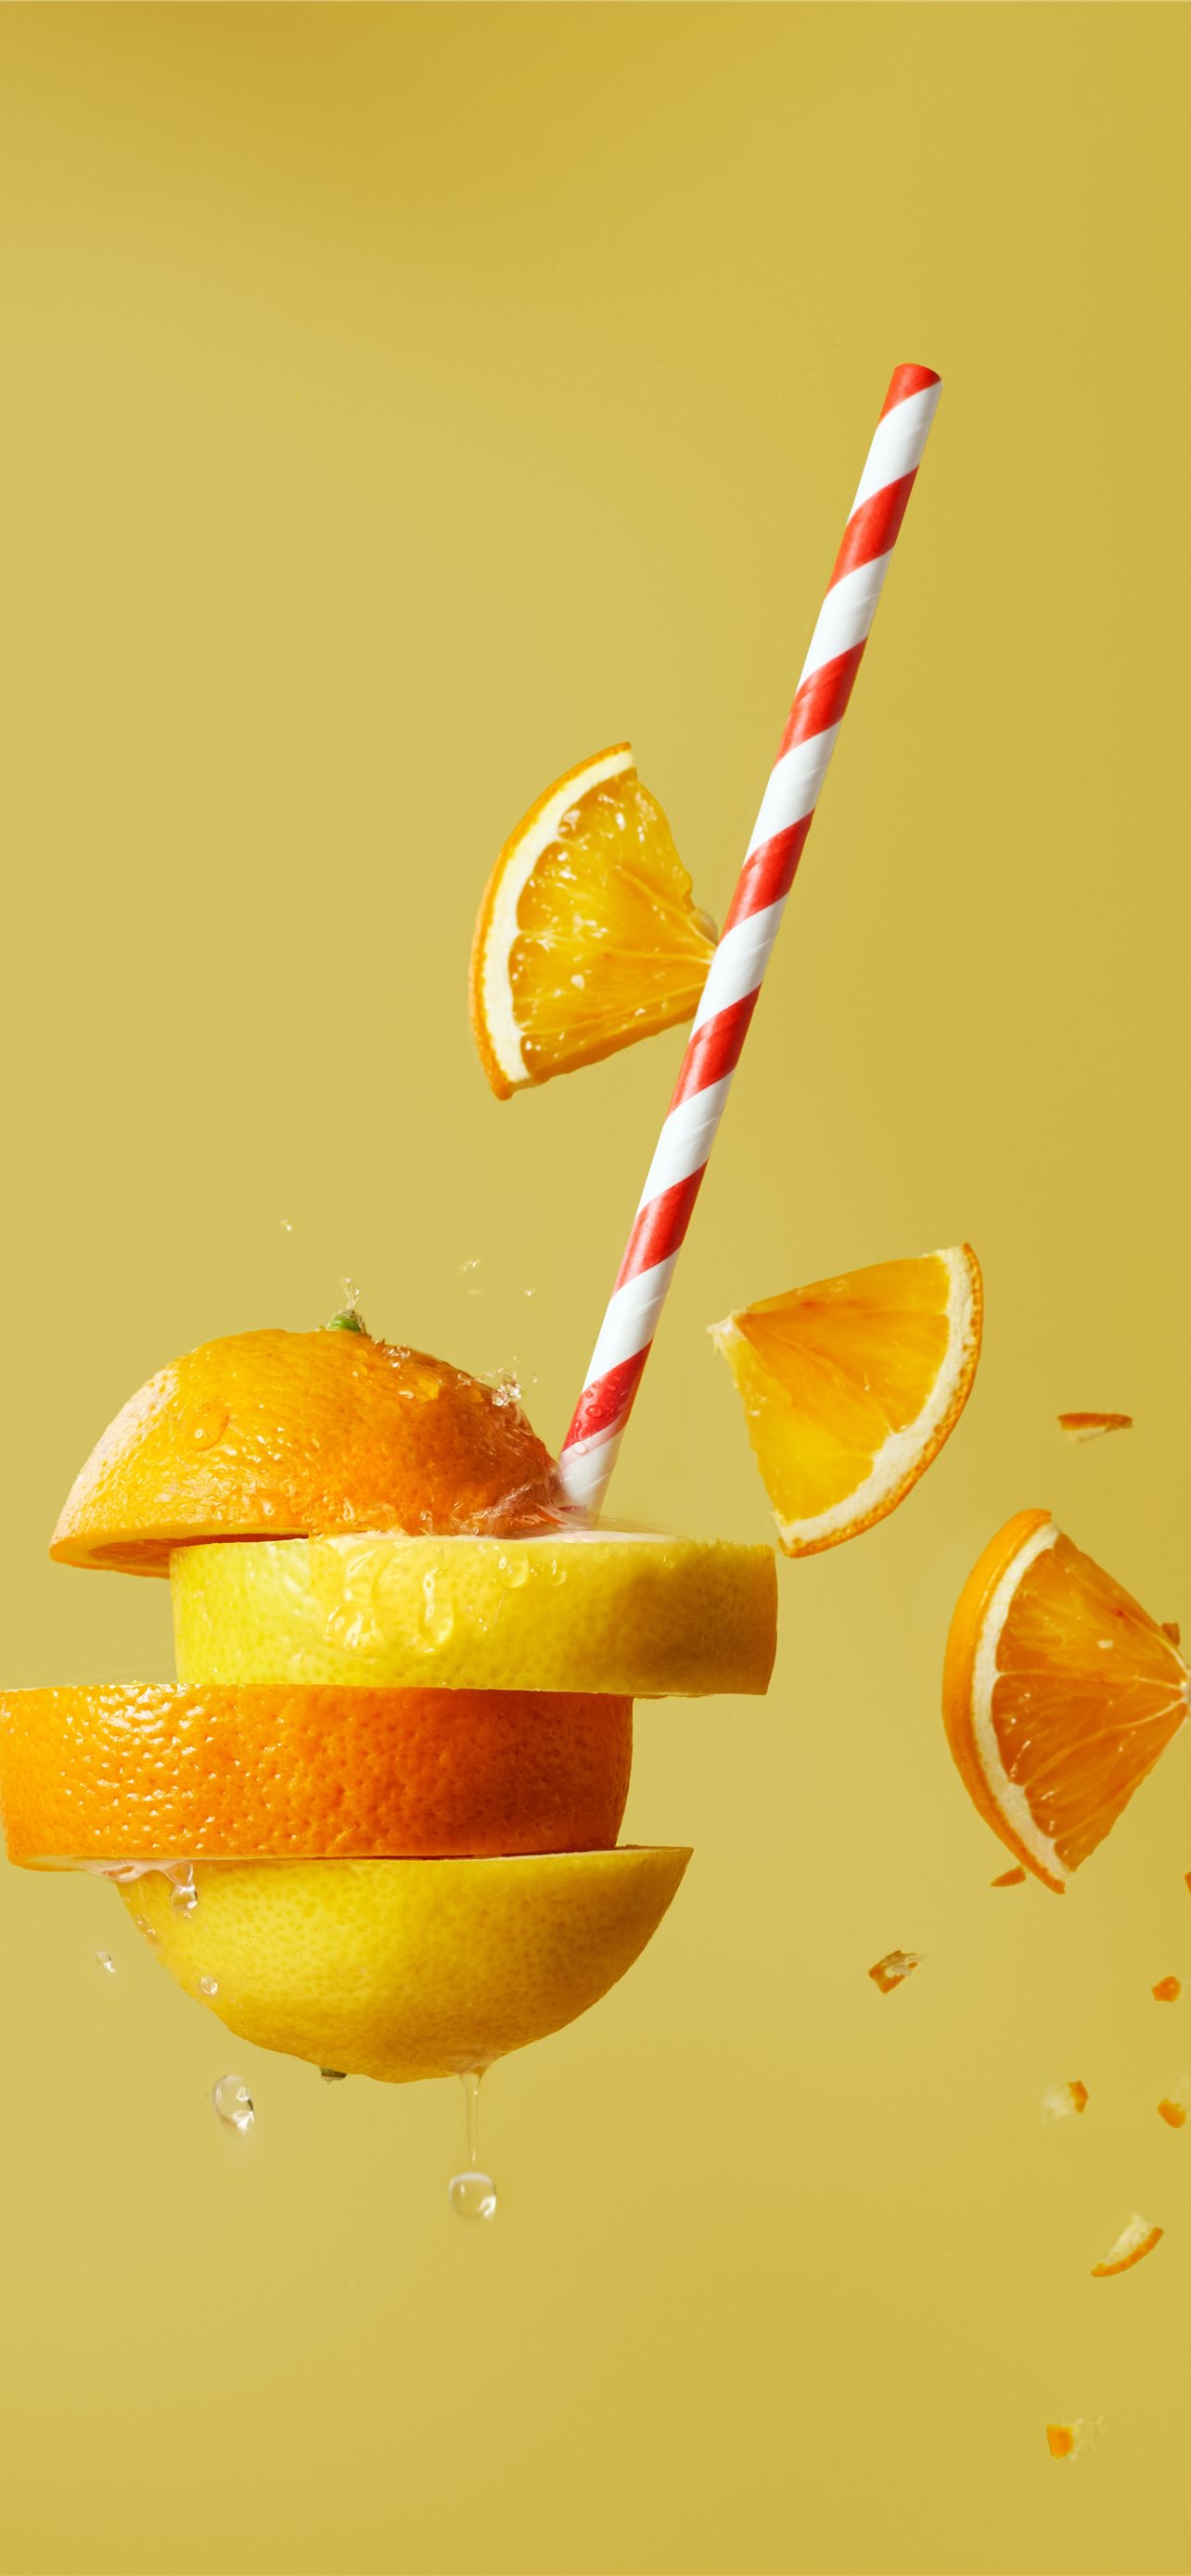 sliced orange fruit with straw iPhone Wallpaper Free Download